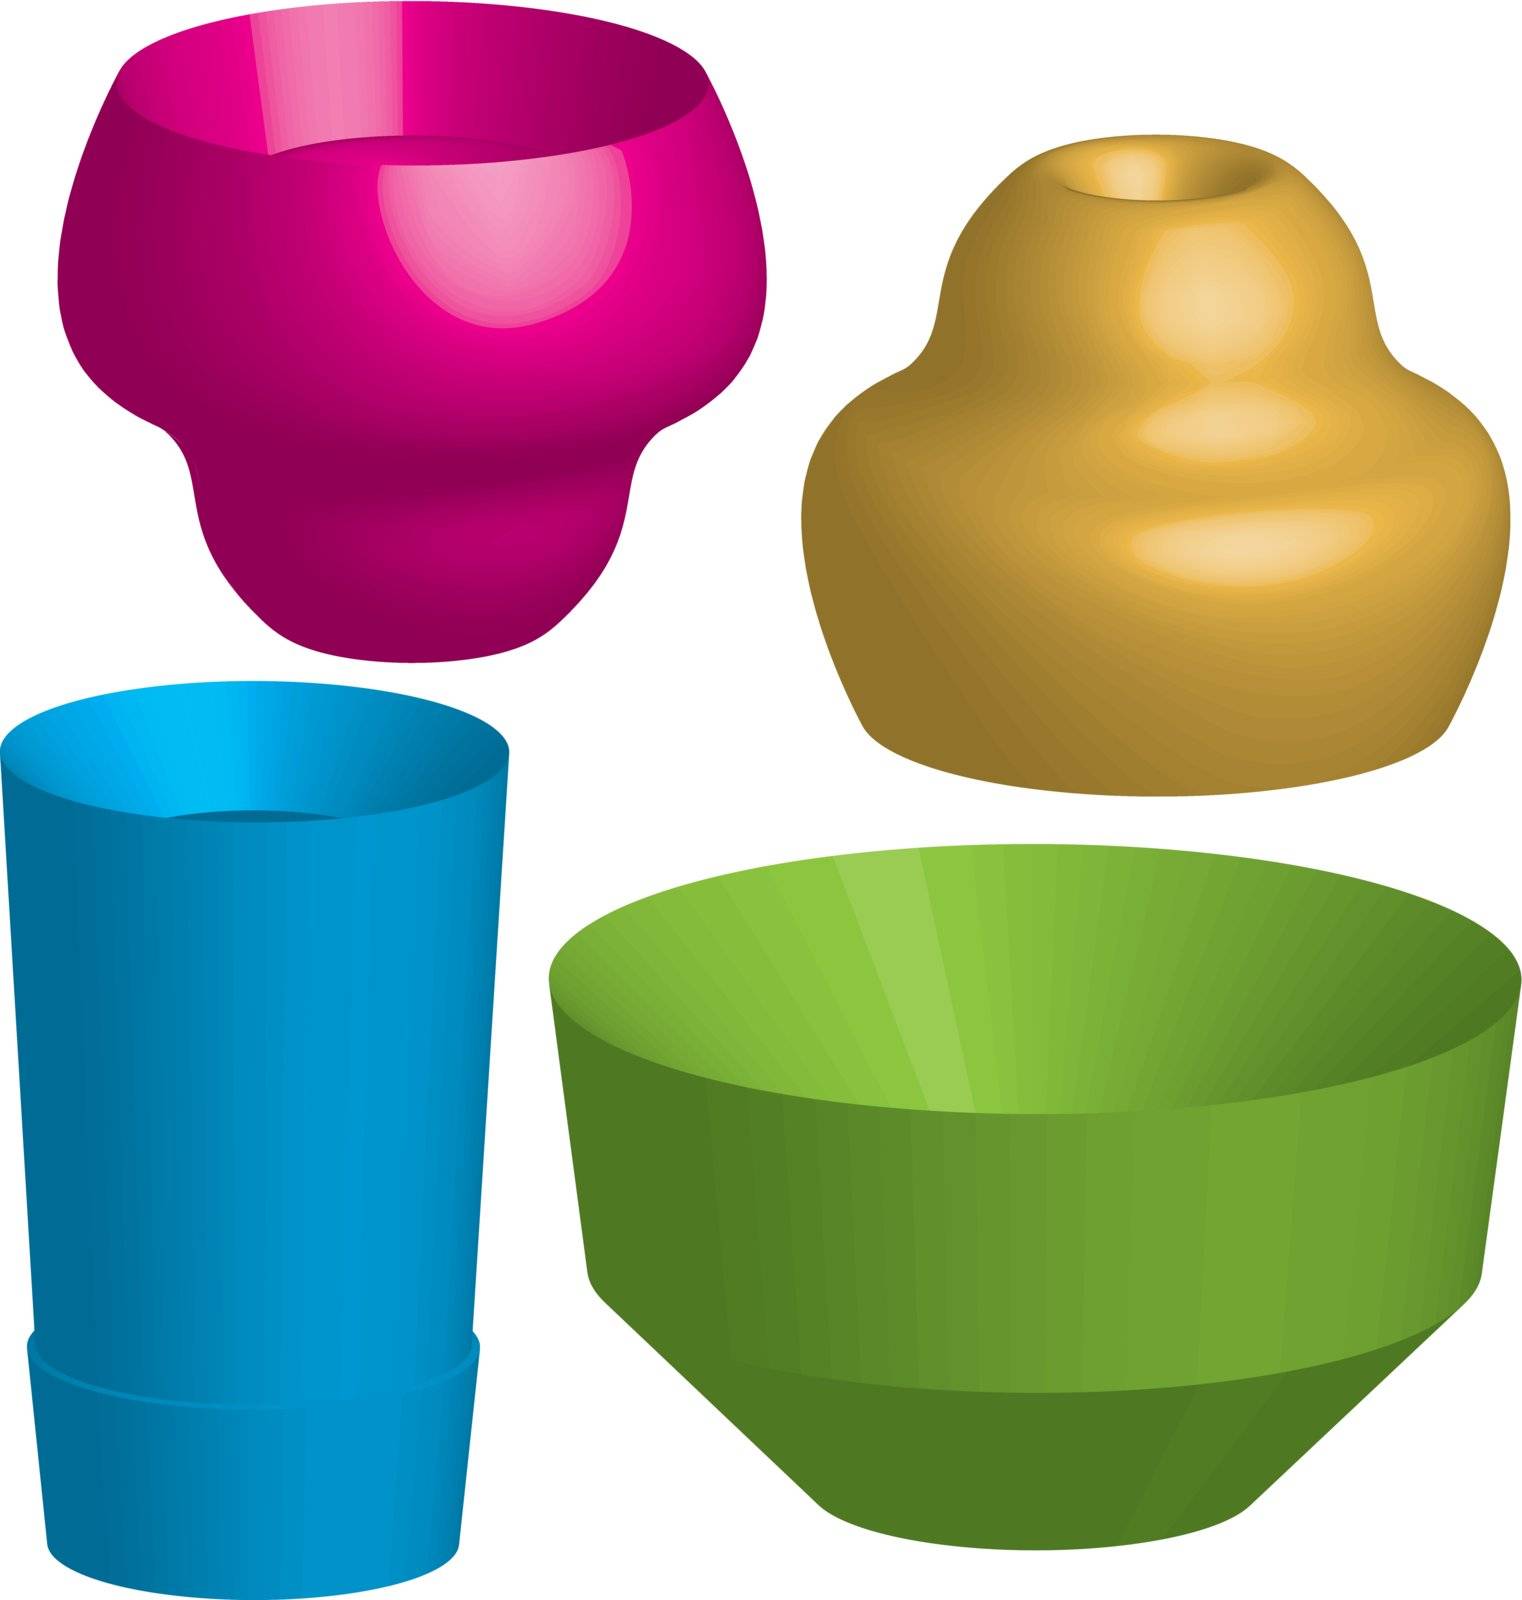 Vector Illustration of Abstract Saucer Household objects.